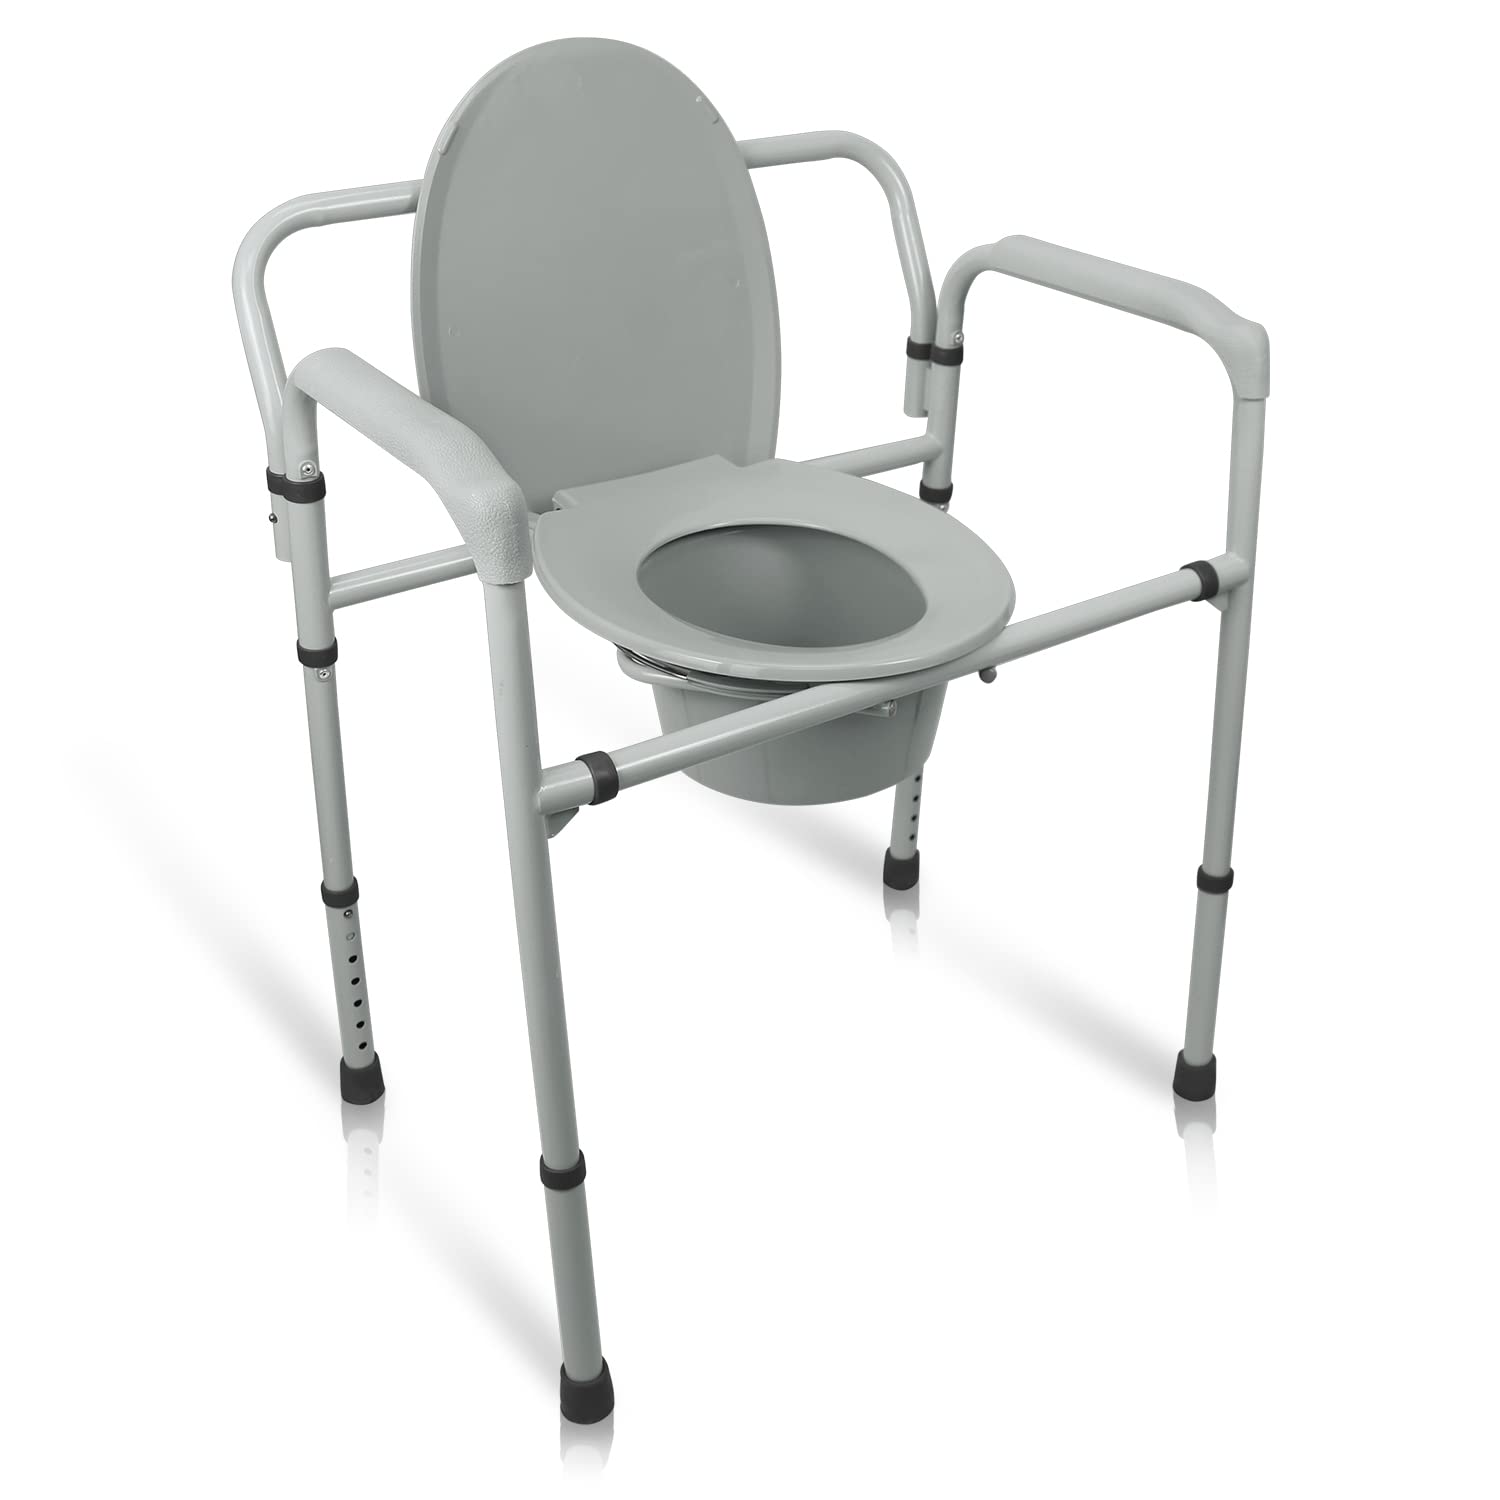 Vive Bariatric Bedside Commode 500 lb Capacity- Folding 3n1 Toilet Chair, Portable Extra Wide Seat with Bucket Splash Guard, Heavy Duty Adult Bathroom, Pail Fits Standard Disposable Liner Bag, Nonslip